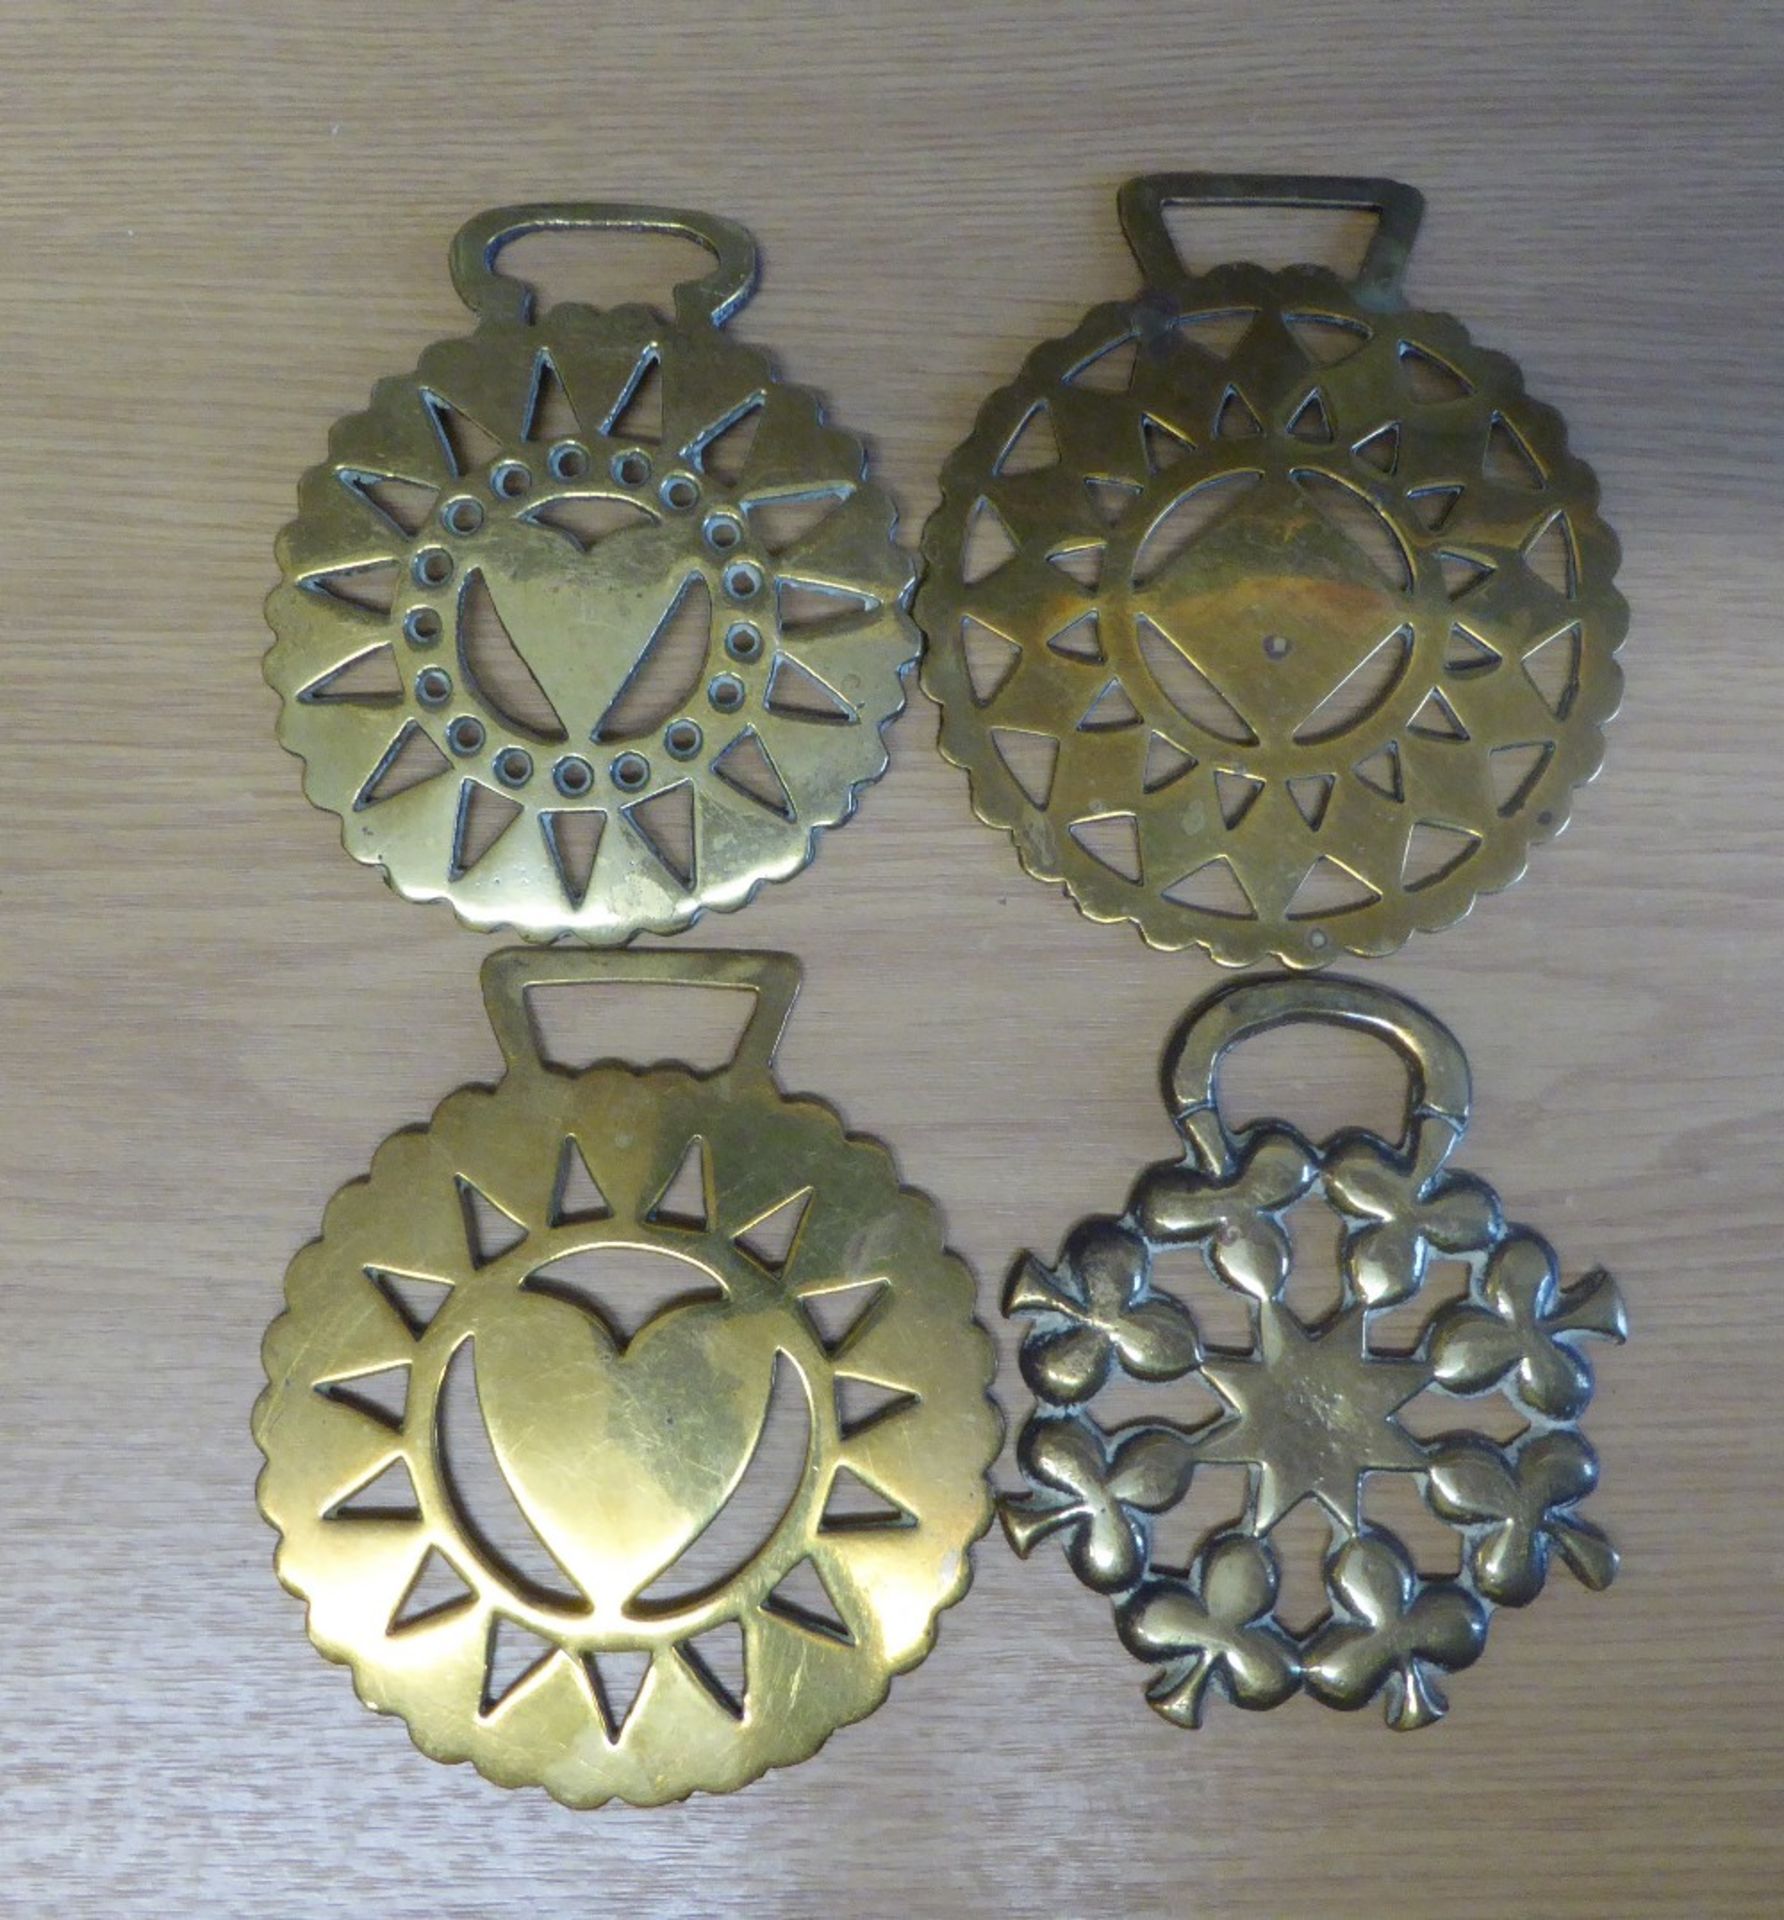 4 x brasses with assorted perforated designs of hearts, diamond and clubs - 2 are stamped and 2 are